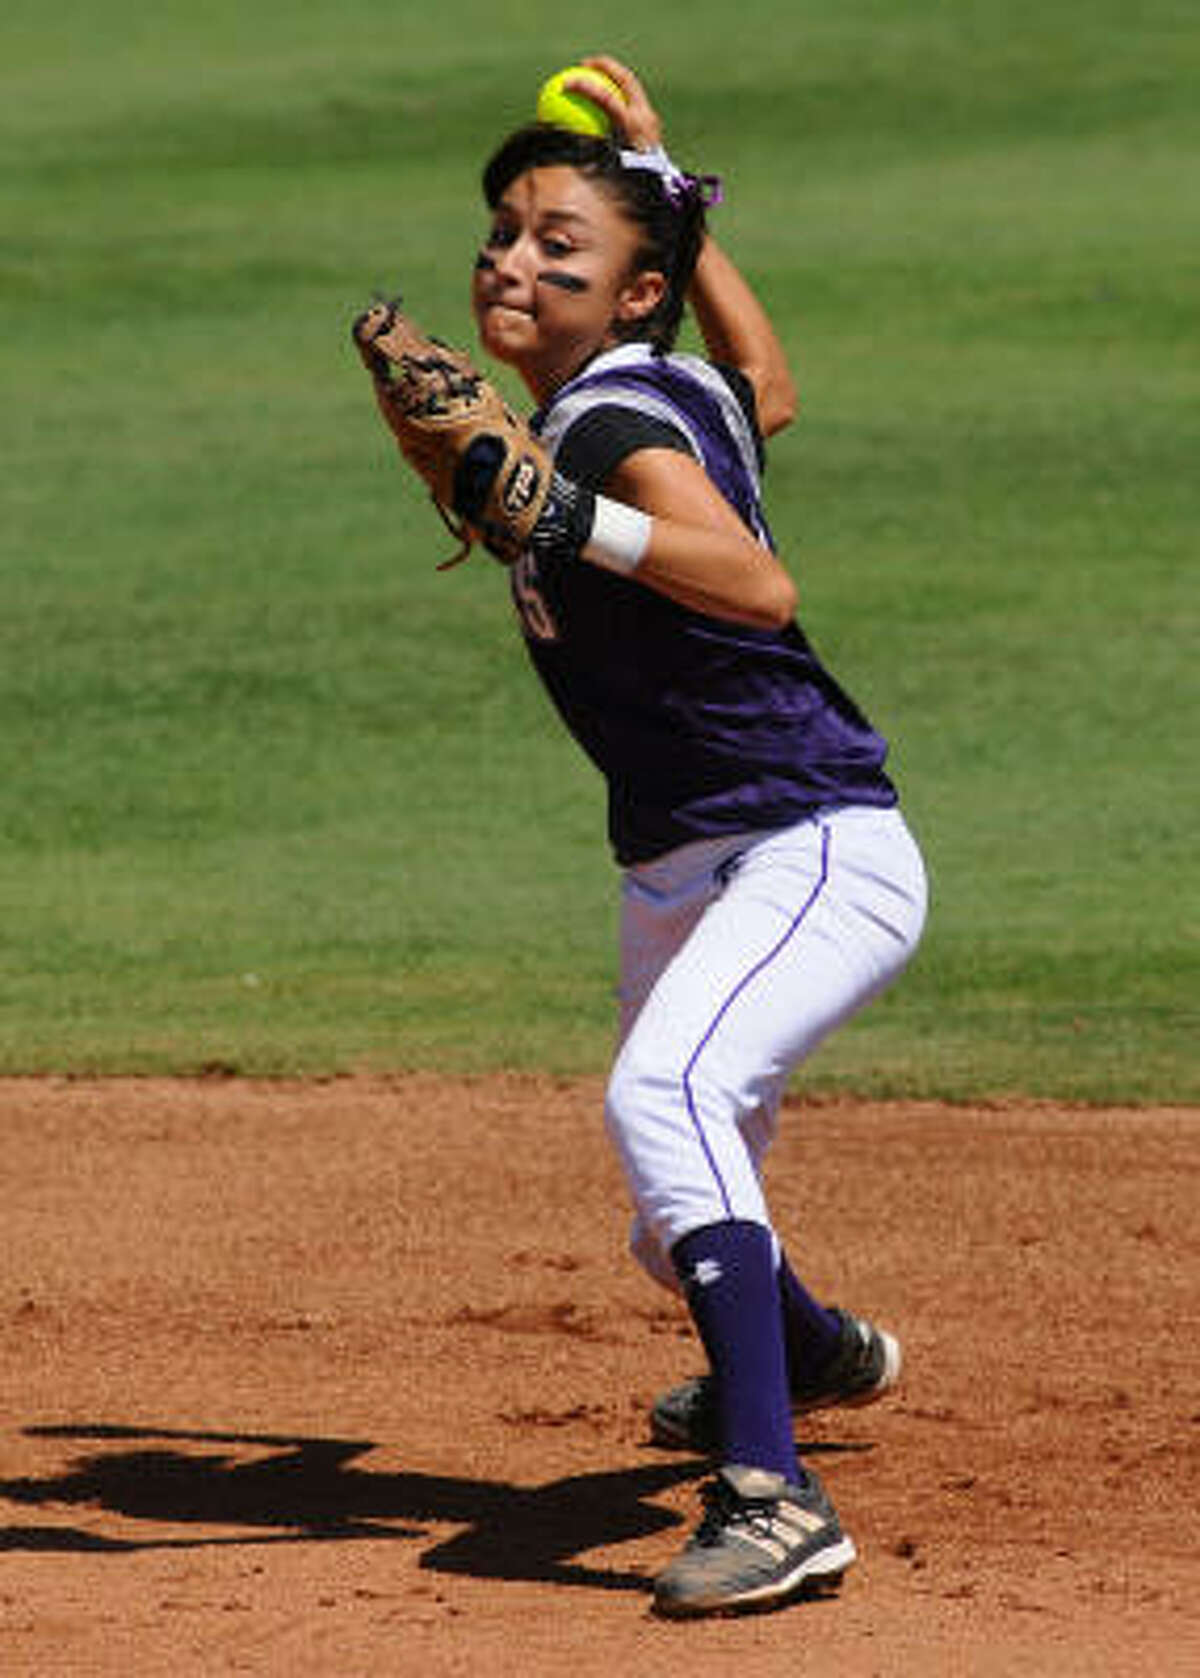 Gabby Banda delivers a throw to first base for the out during the 1-0 win over Azle.